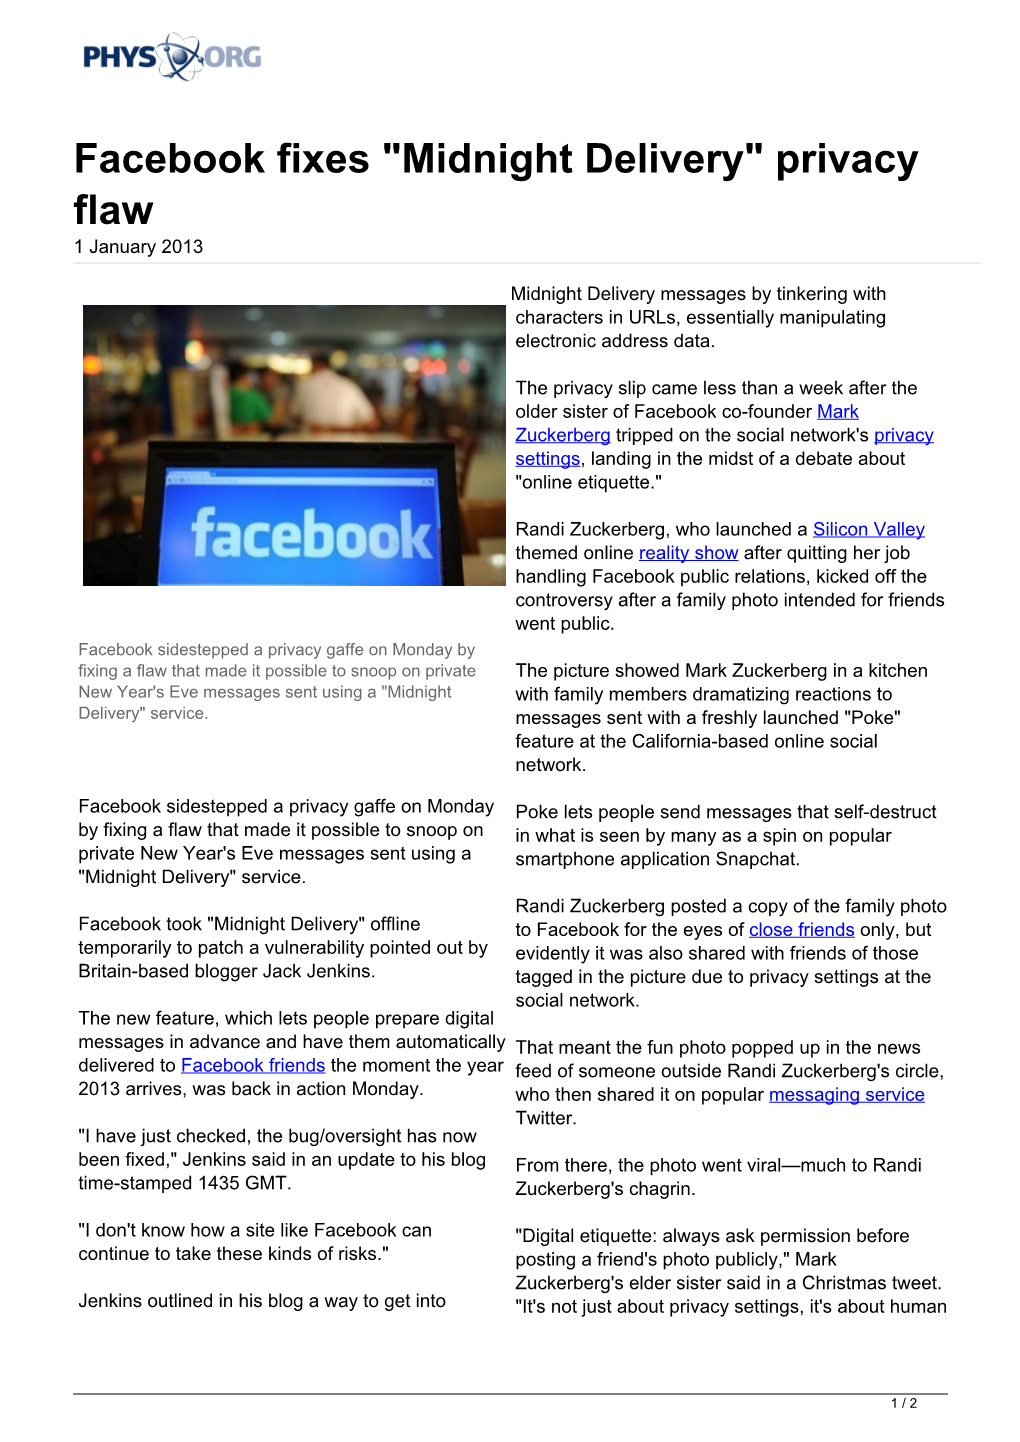 Facebook Fixes "Midnight Delivery" Privacy Flaw 1 January 2013